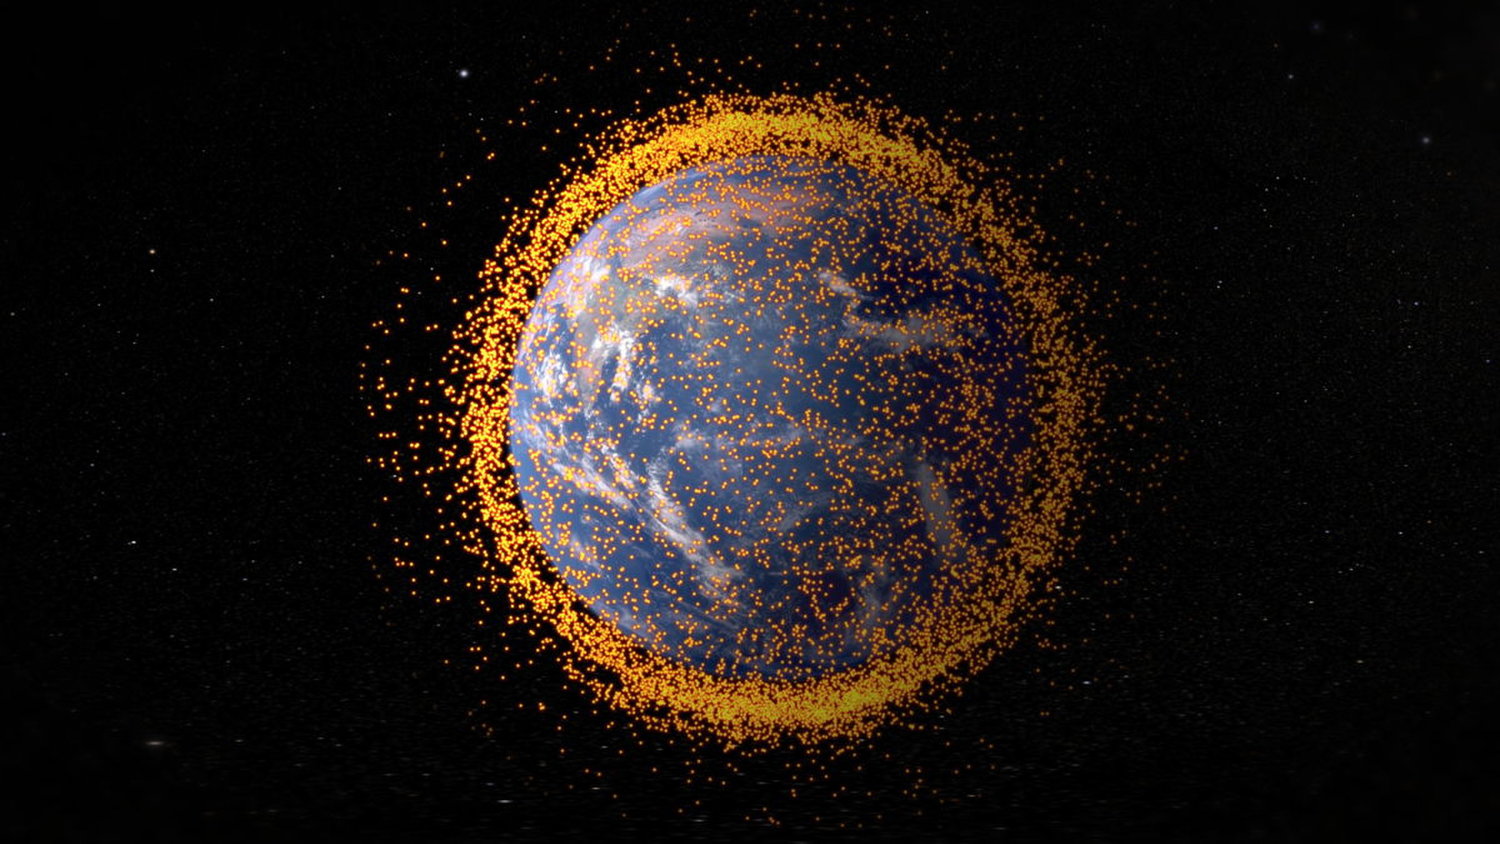 Graphic showing the cloud of space debris that currently surrounds the Earth. - Image Credit: NASA’s Goddard Space Flight Center/JSC